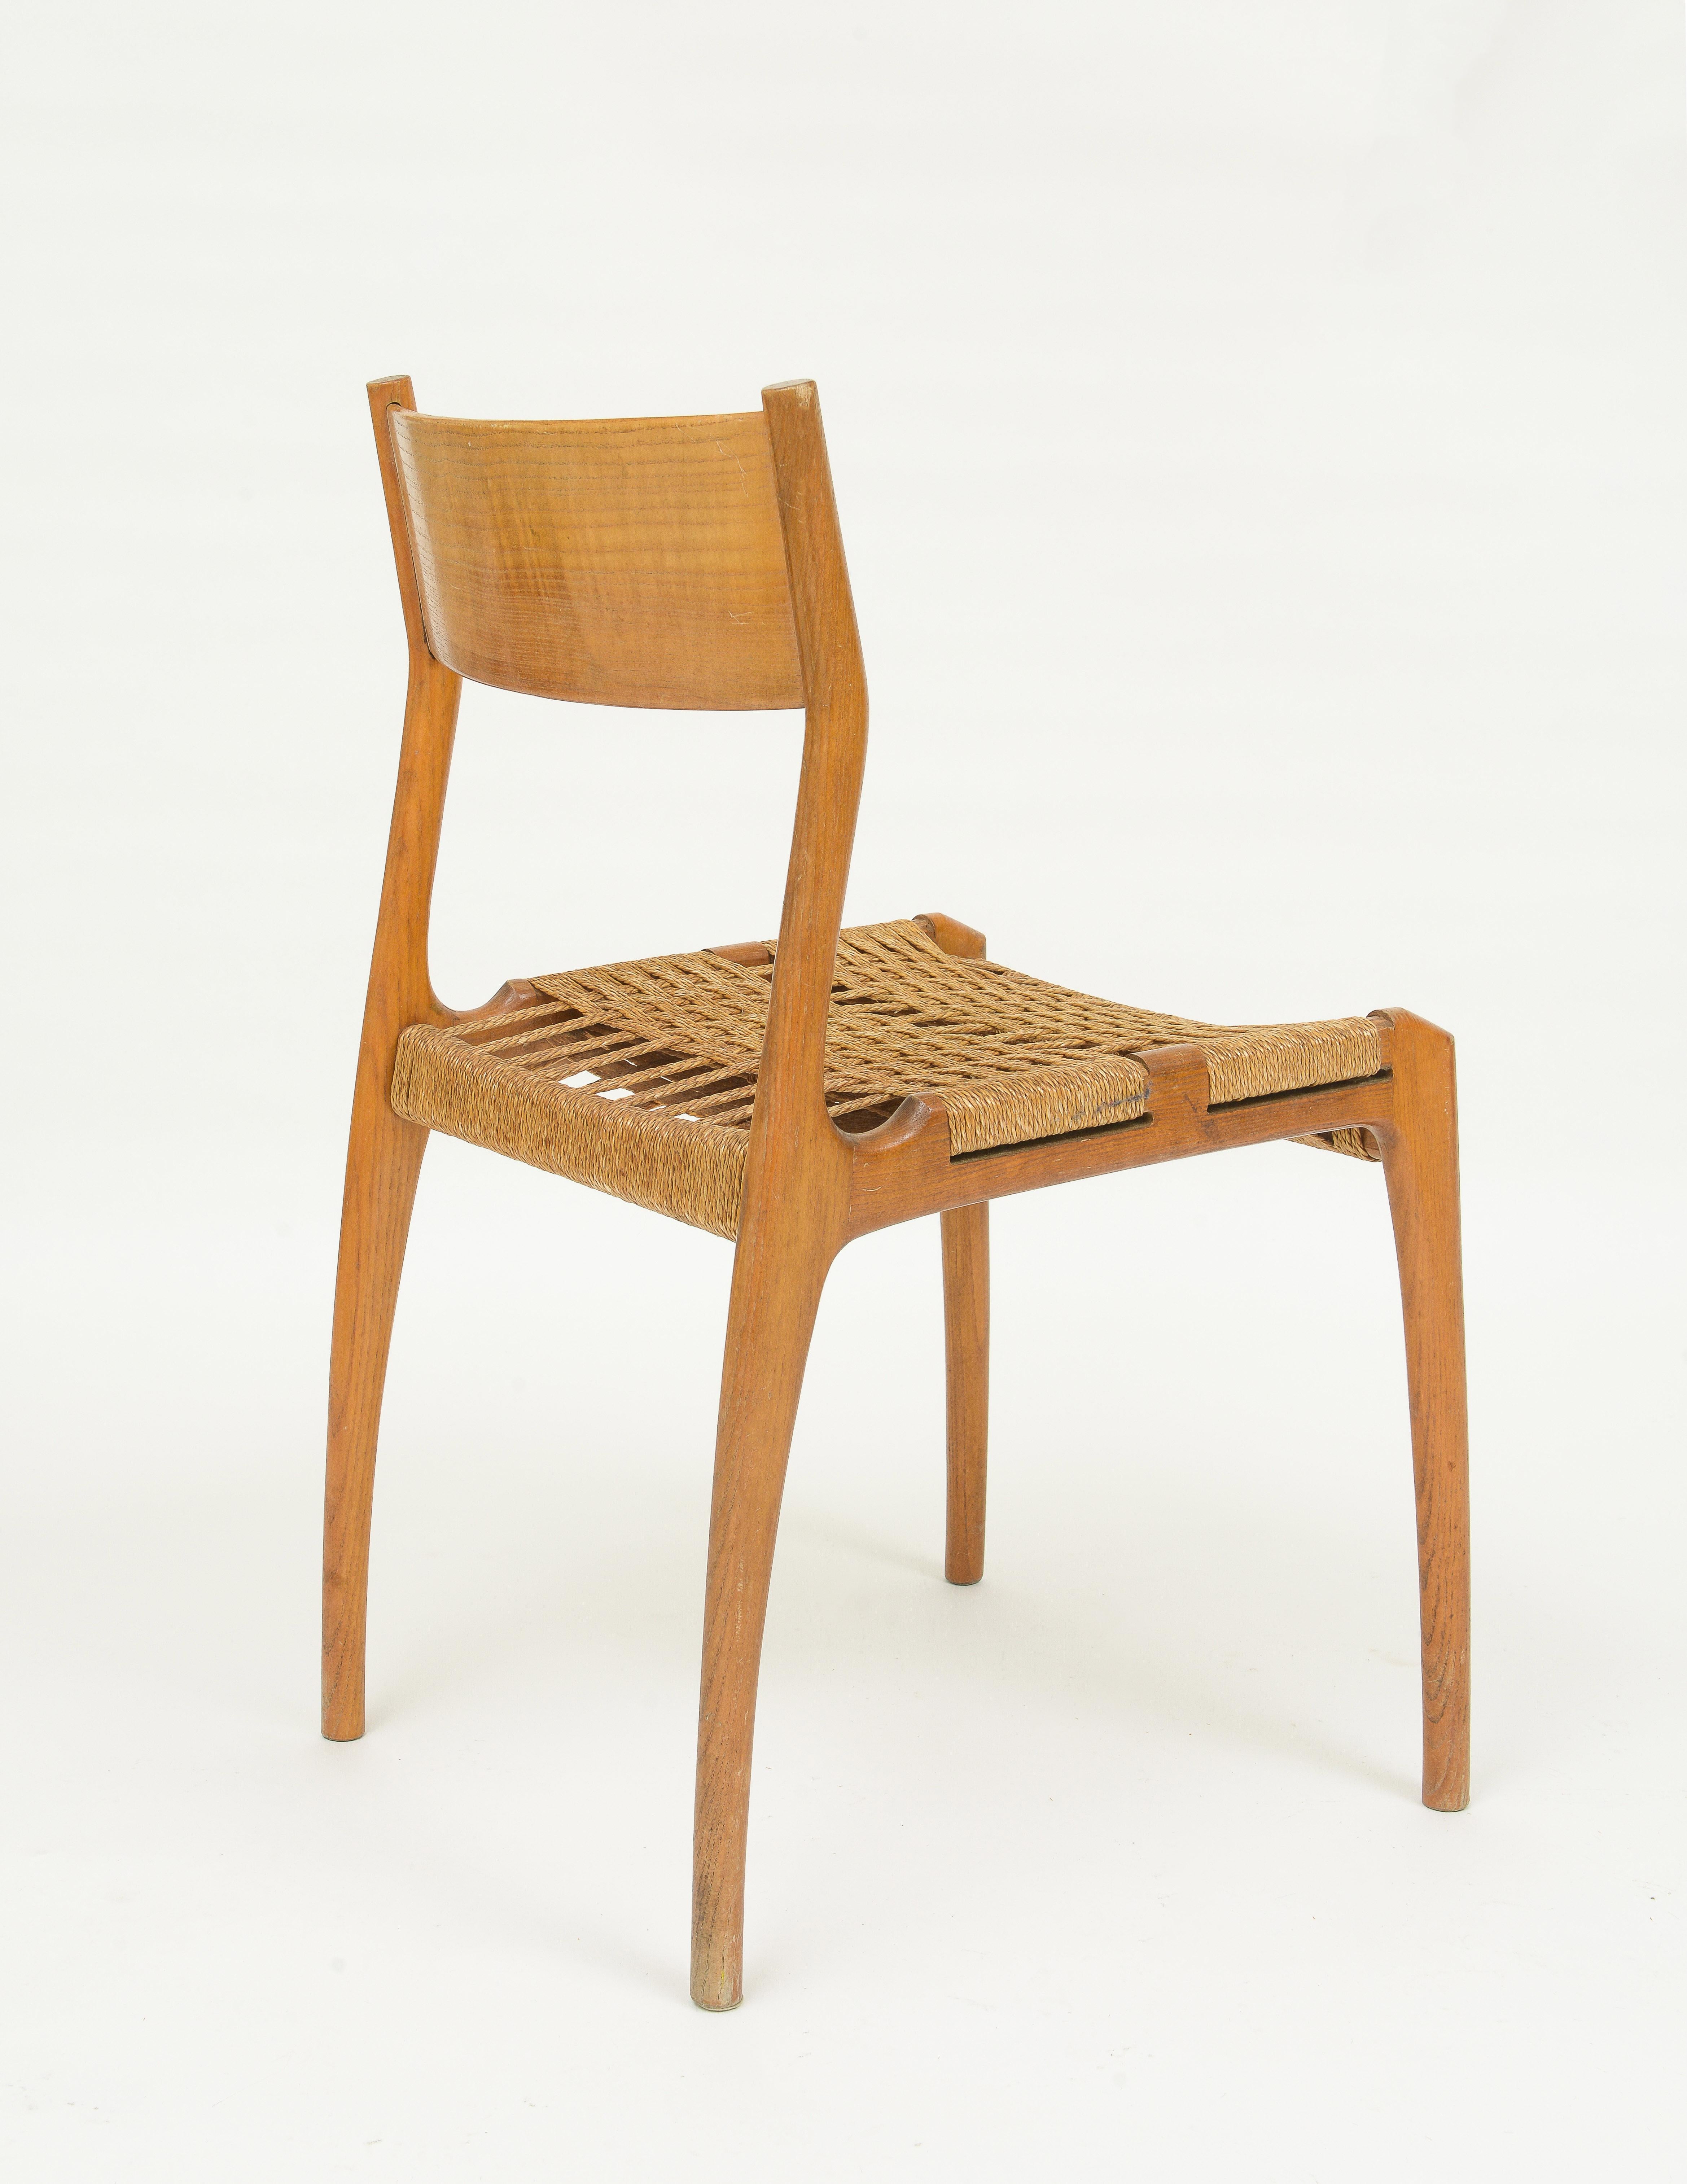 6 Italian Dining Chairs with Woven Rush Seating, 1960's France For Sale 4